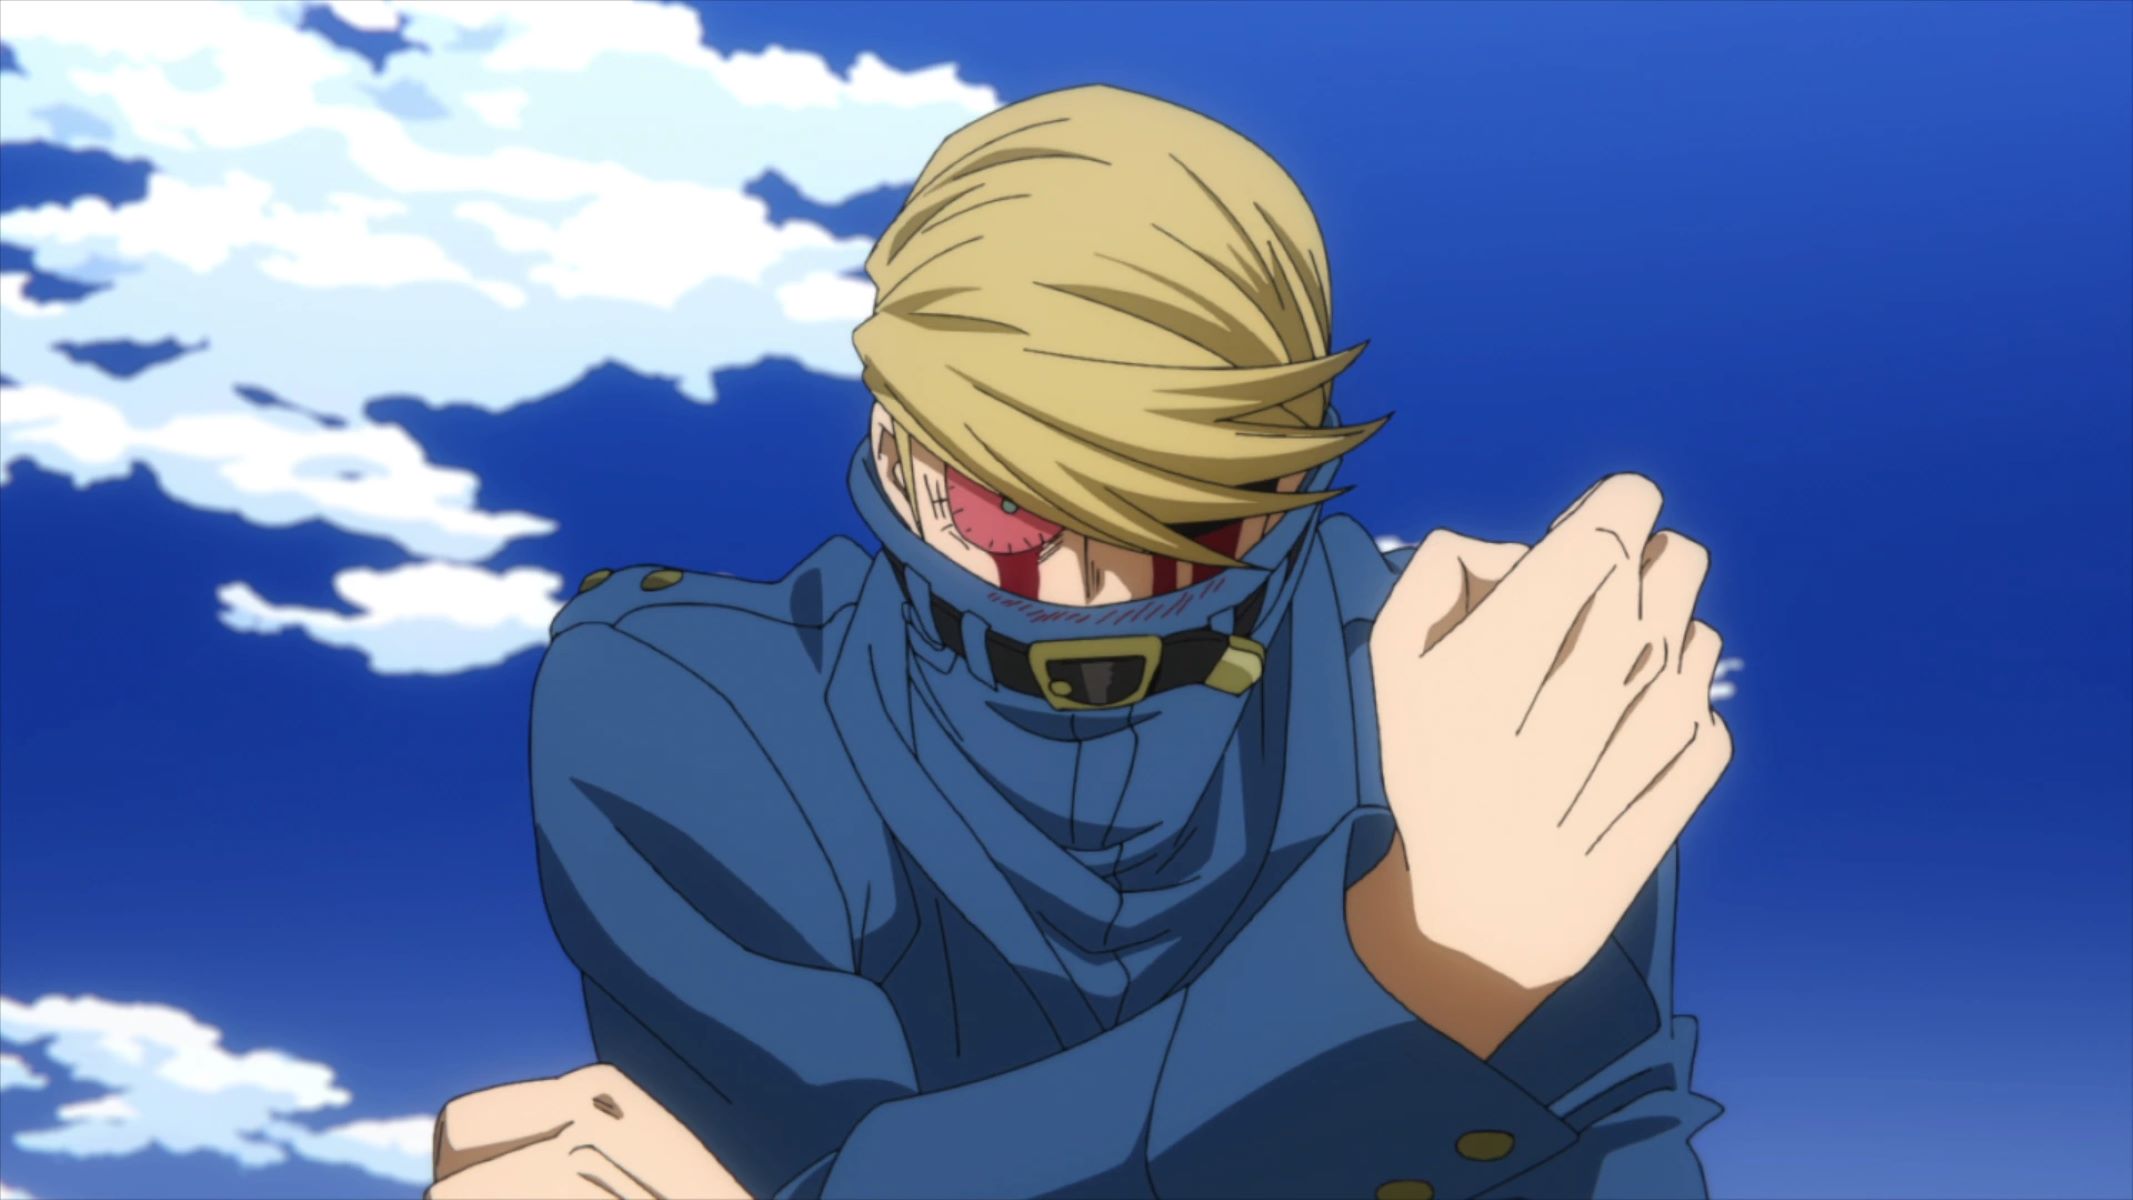 The Surprising Reason Behind Best Jeanist's Extraordinary Neck Length